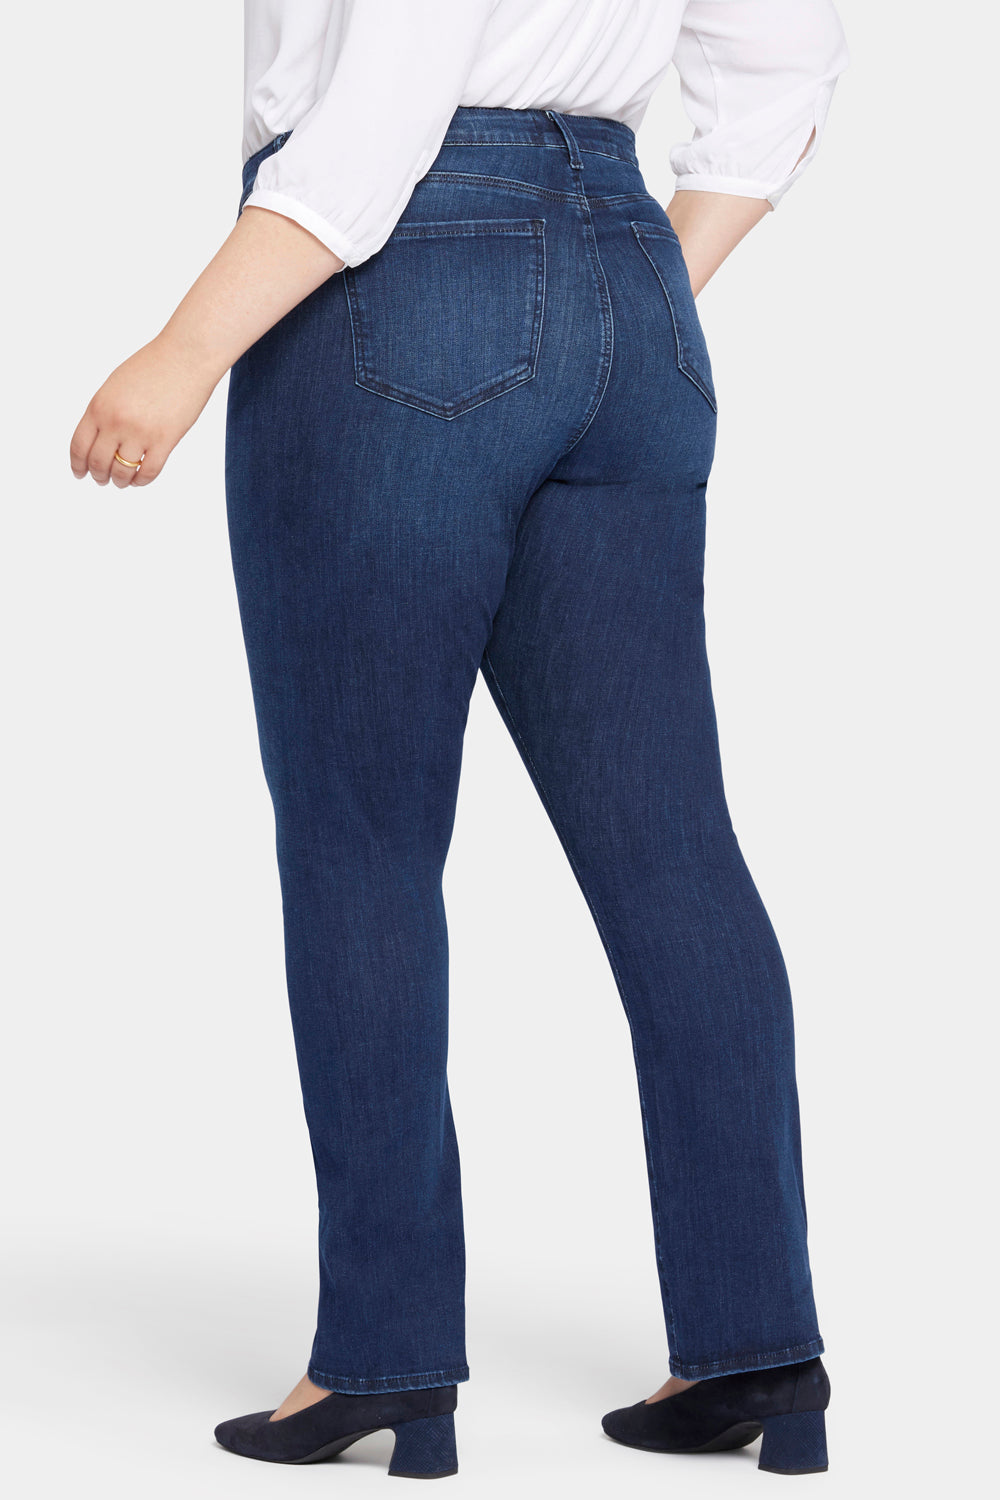 NYDJ Le Silhouette Slim Bootcut Jeans In Plus Size With High Rise  - Marvelous